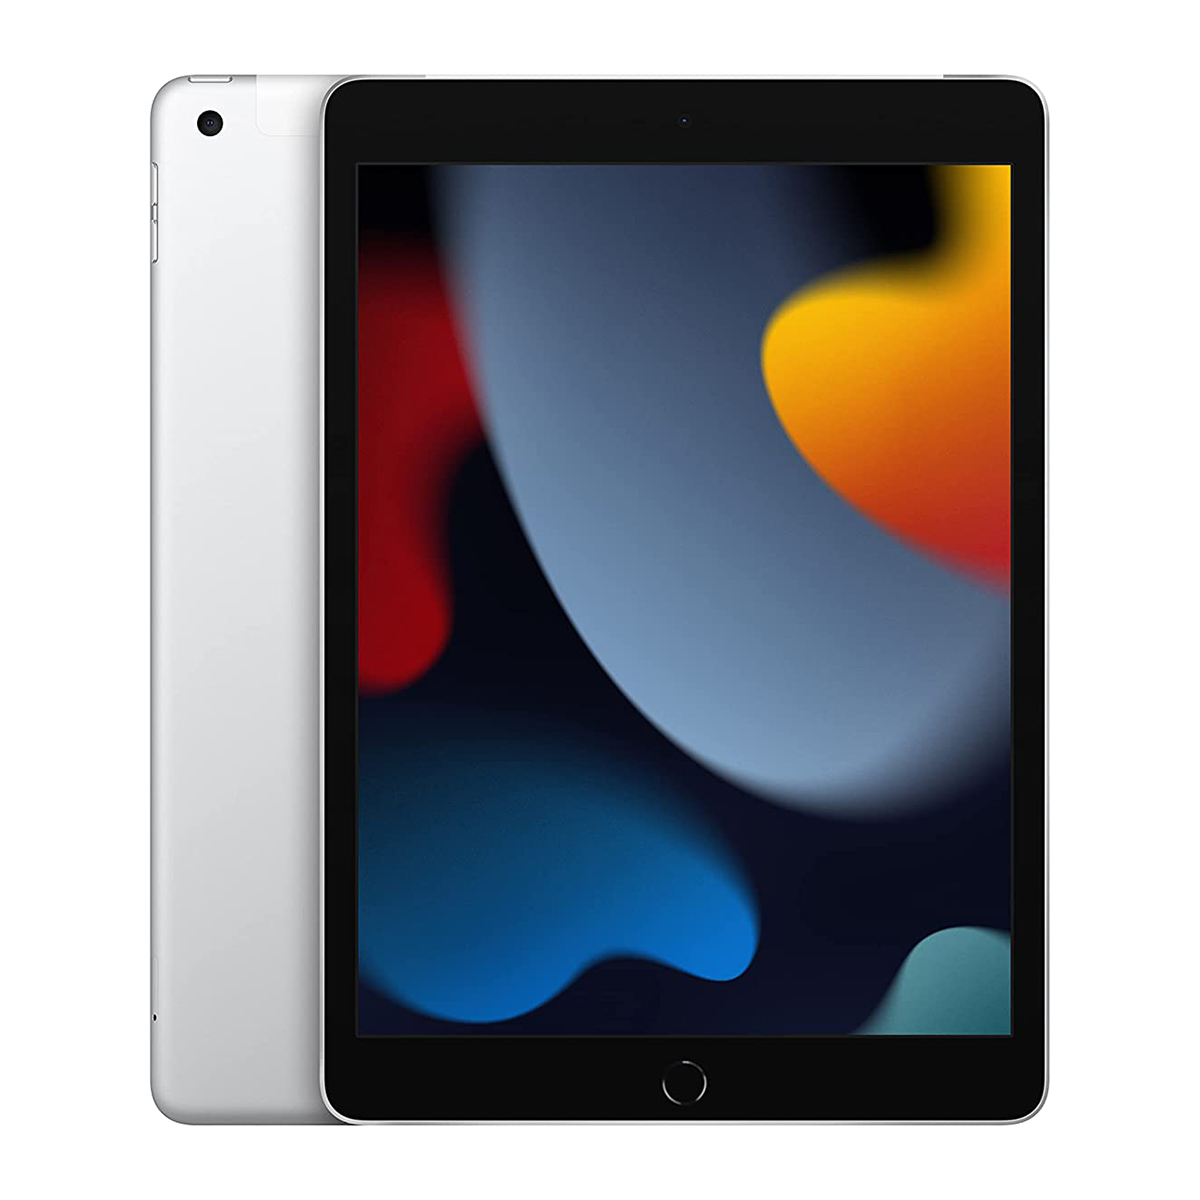 pude Okklusion Udelade Apple iPad 5th generation 2017 9.7 inch price in Kuwait | Compare Prices